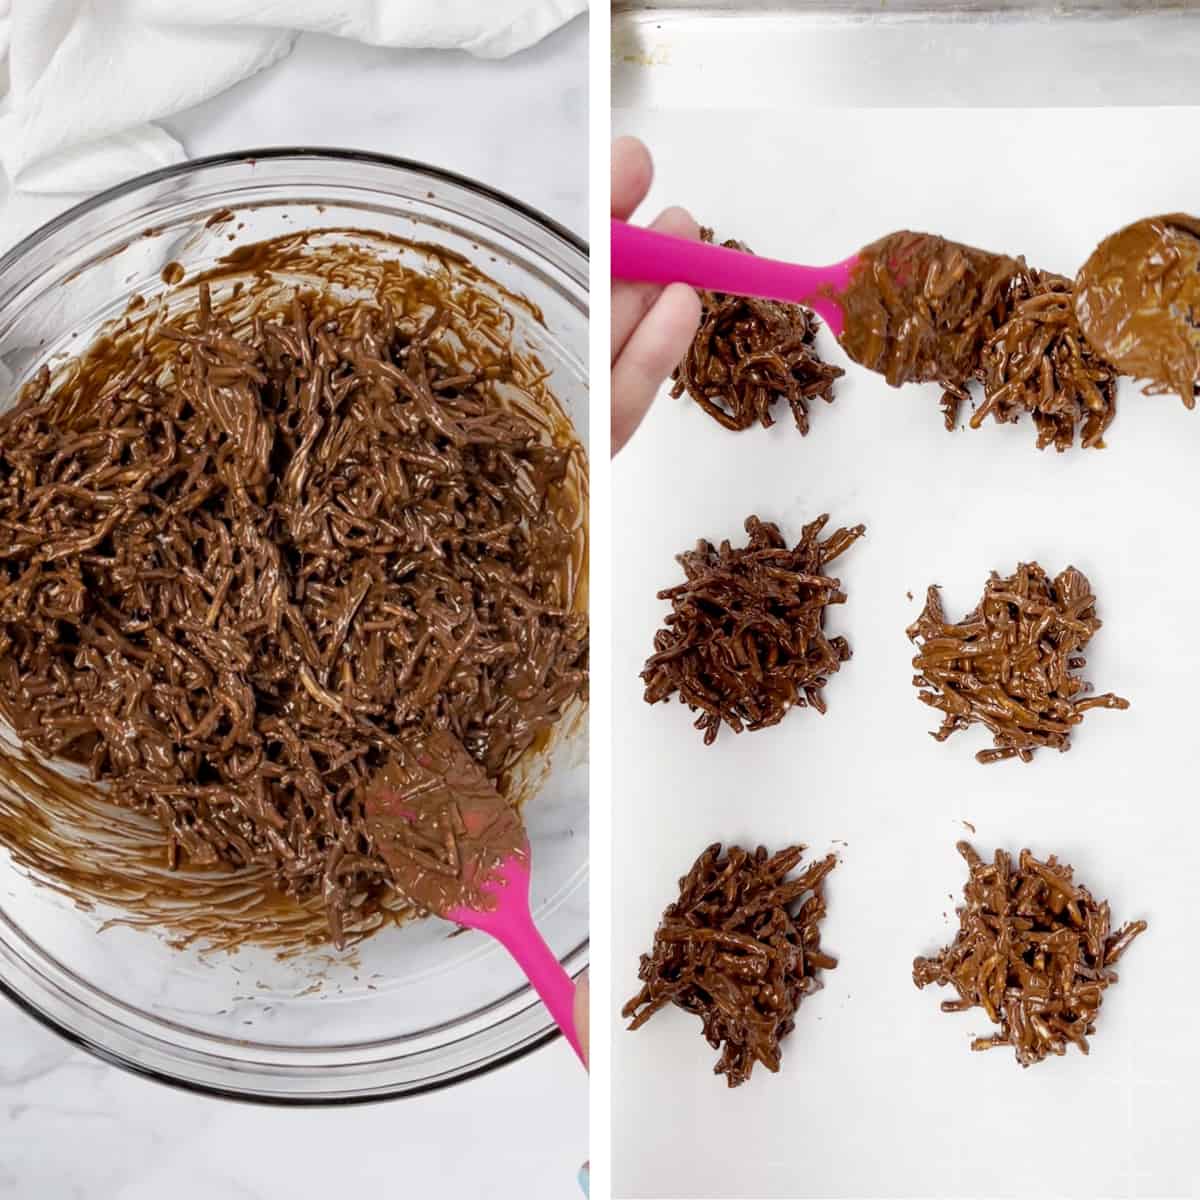 Mounds of chocolate haystacks on wax paper.